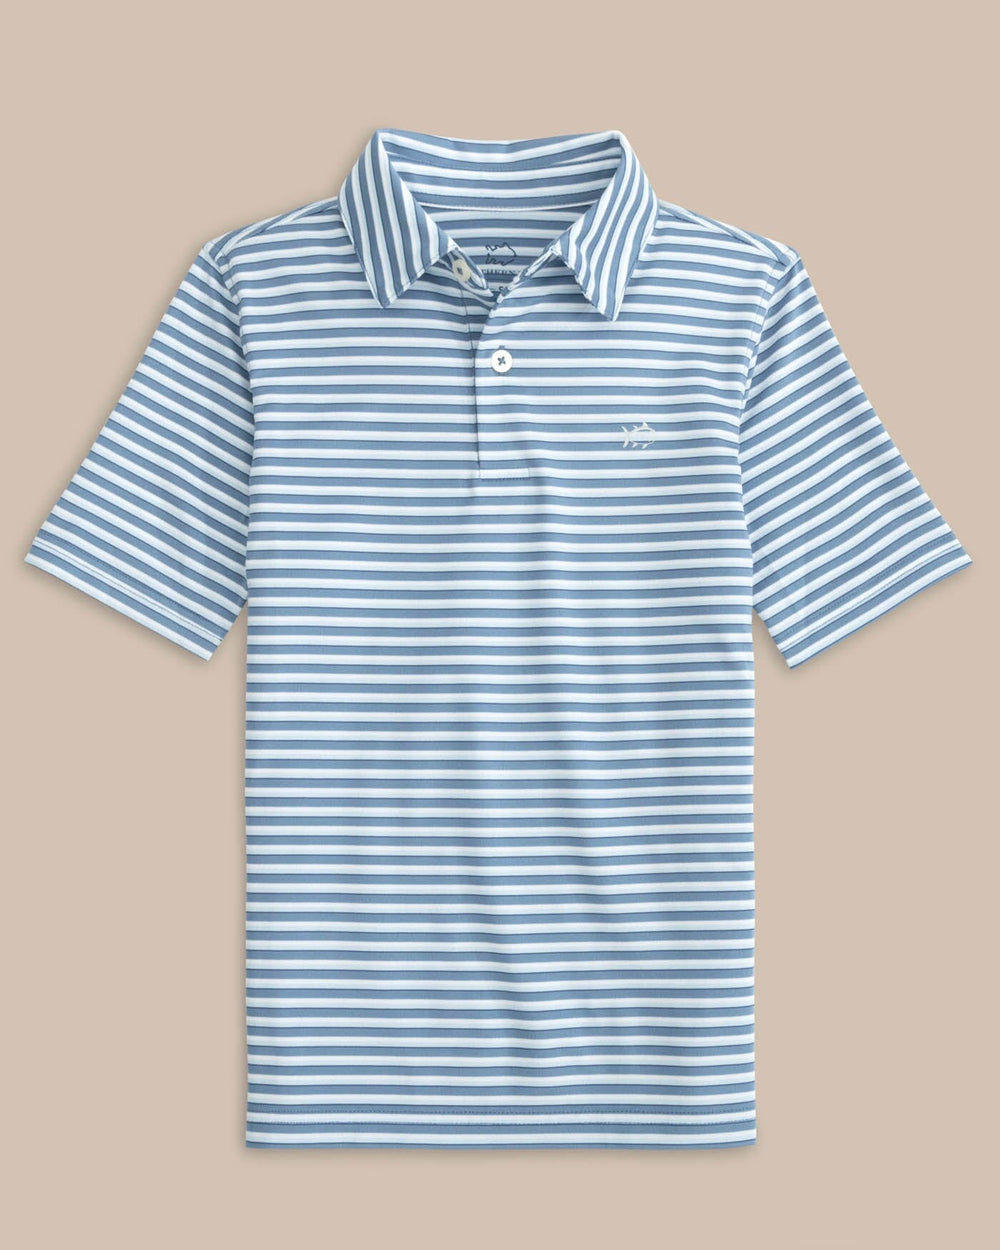 The front view of the Southern Tide Boys Driver Carova Stripe Polo Shirt by Southern Tide - Coronet Blue